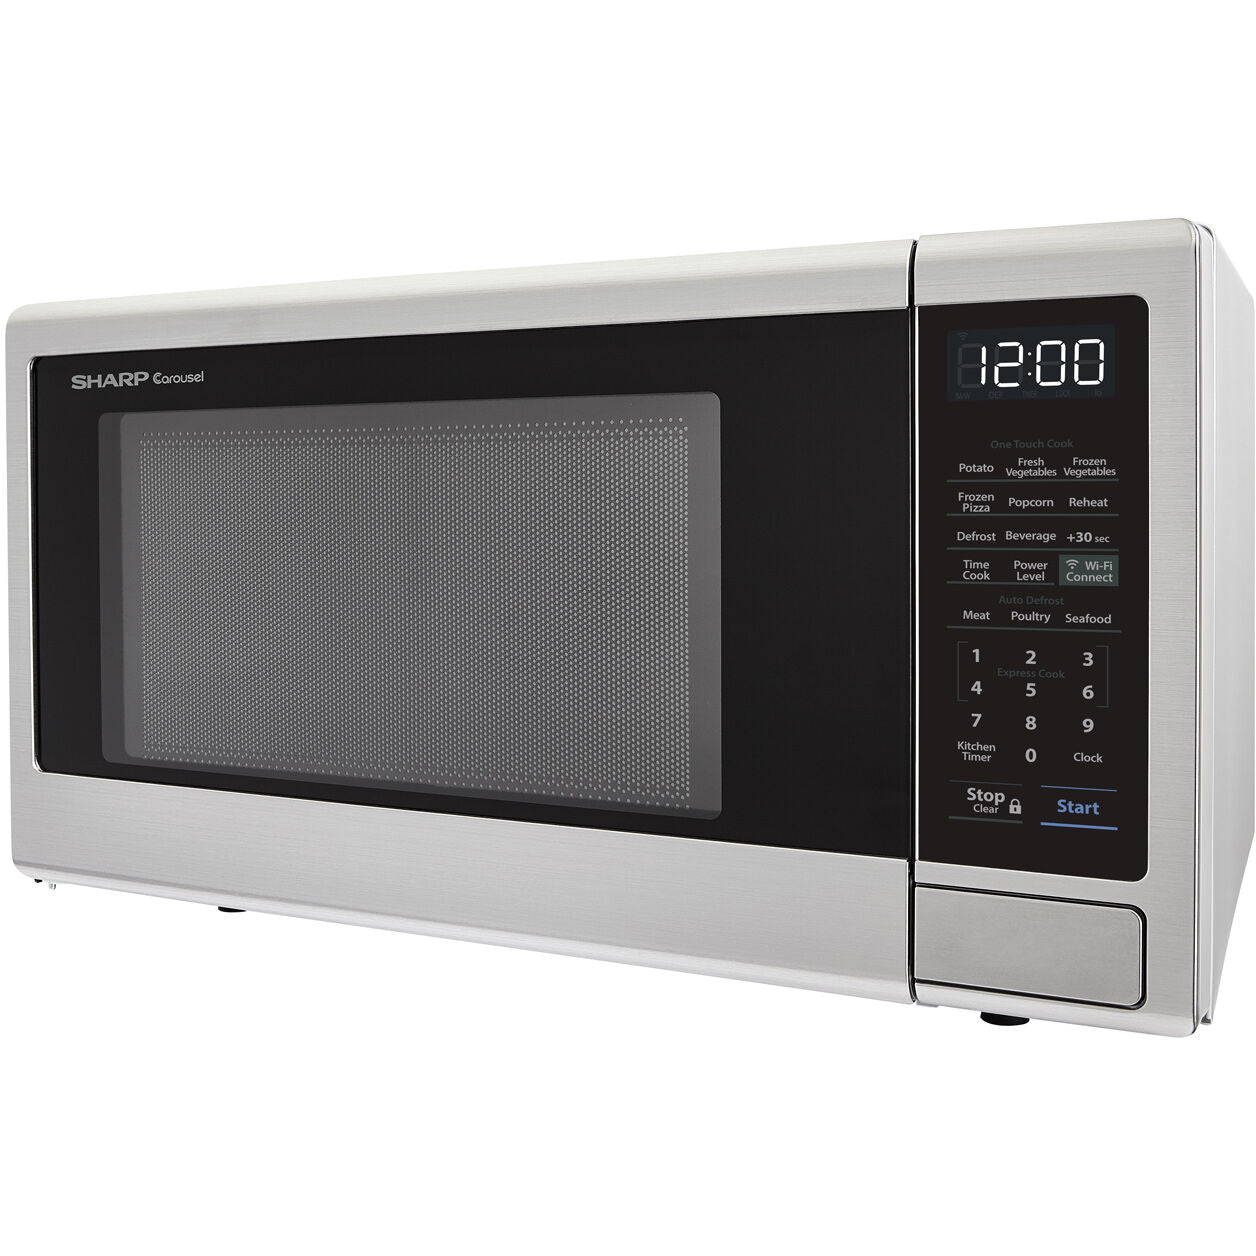 Sharp 1.1 cu. ft. 21 in. Countertop Microwave with Alexa-Enabled Controls in Stainless Steel (SMC1139FS)